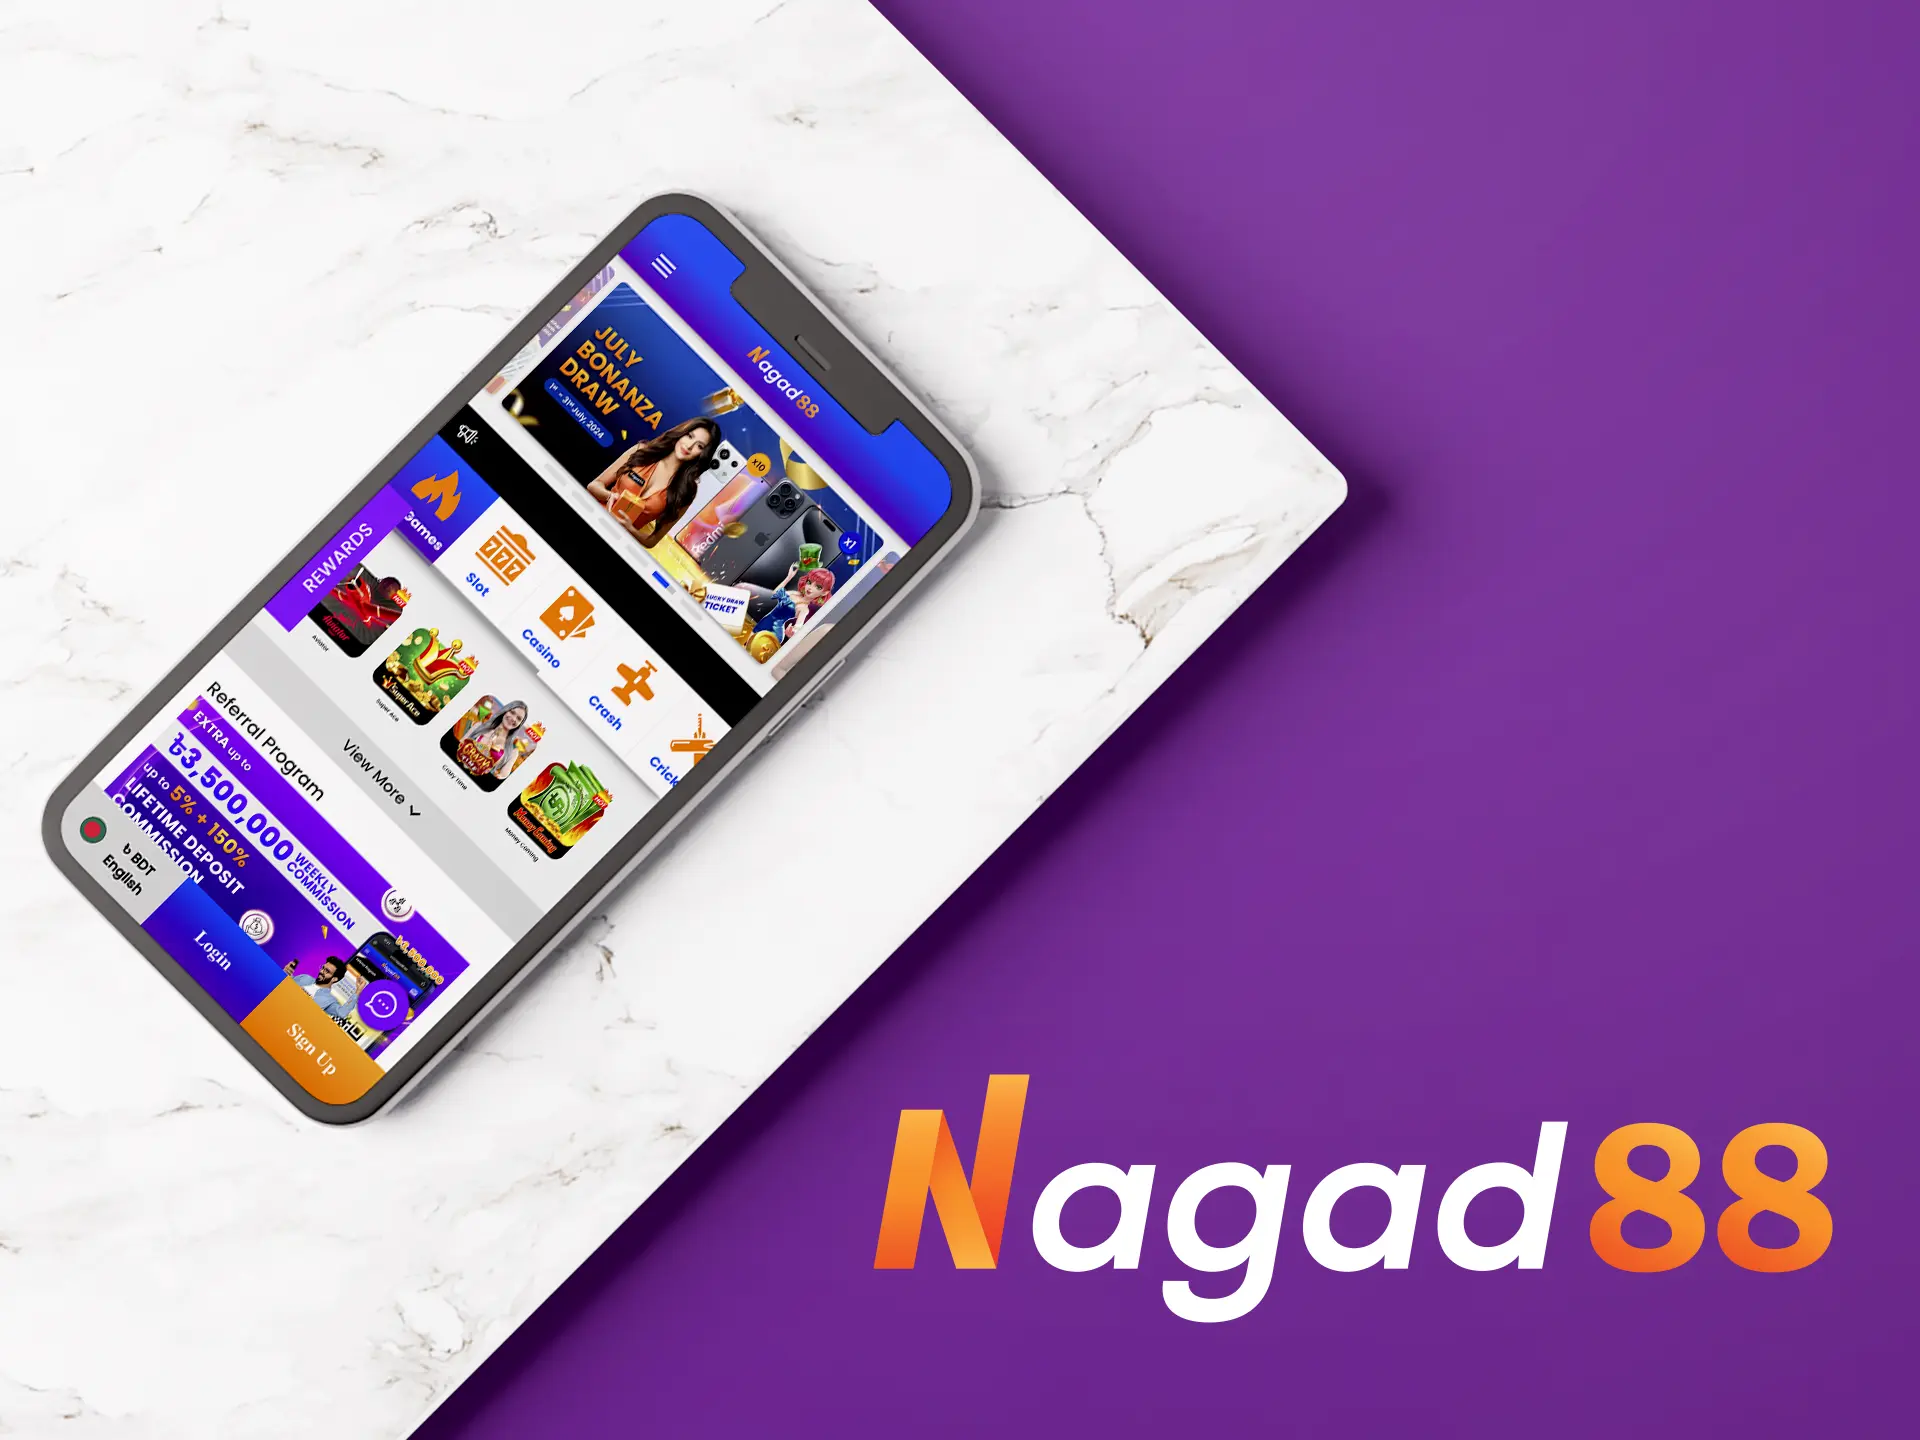 Nagad88 is a unique platform that has an innovative application and has all the necessary licences.